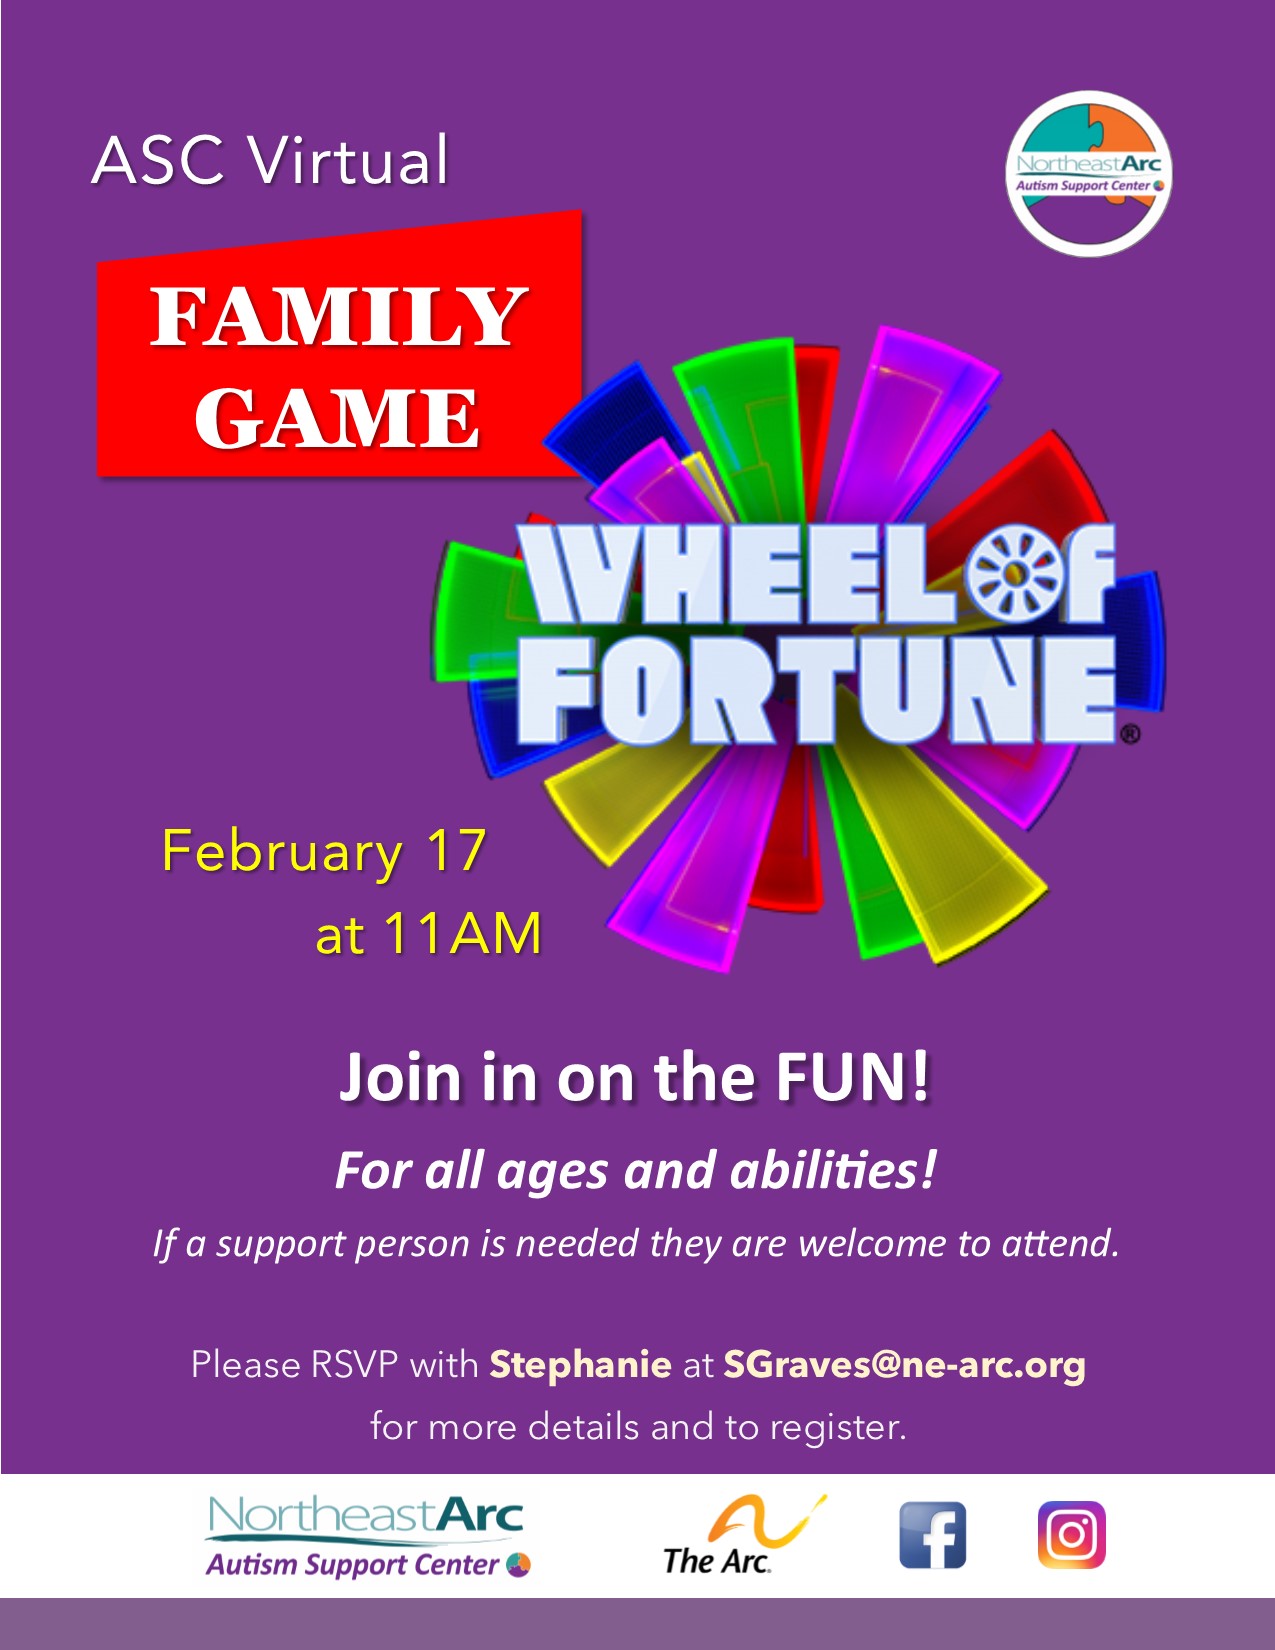 Flyer for Autism Support Centers Virtual Family Game Event. Wheel of Fortune on February 17 at 11AM. For all ages and abilities. If a staff person is needed they are welcome to attend. RSVP Stephanie at SGraves@ne-arc.org for more details and to register.